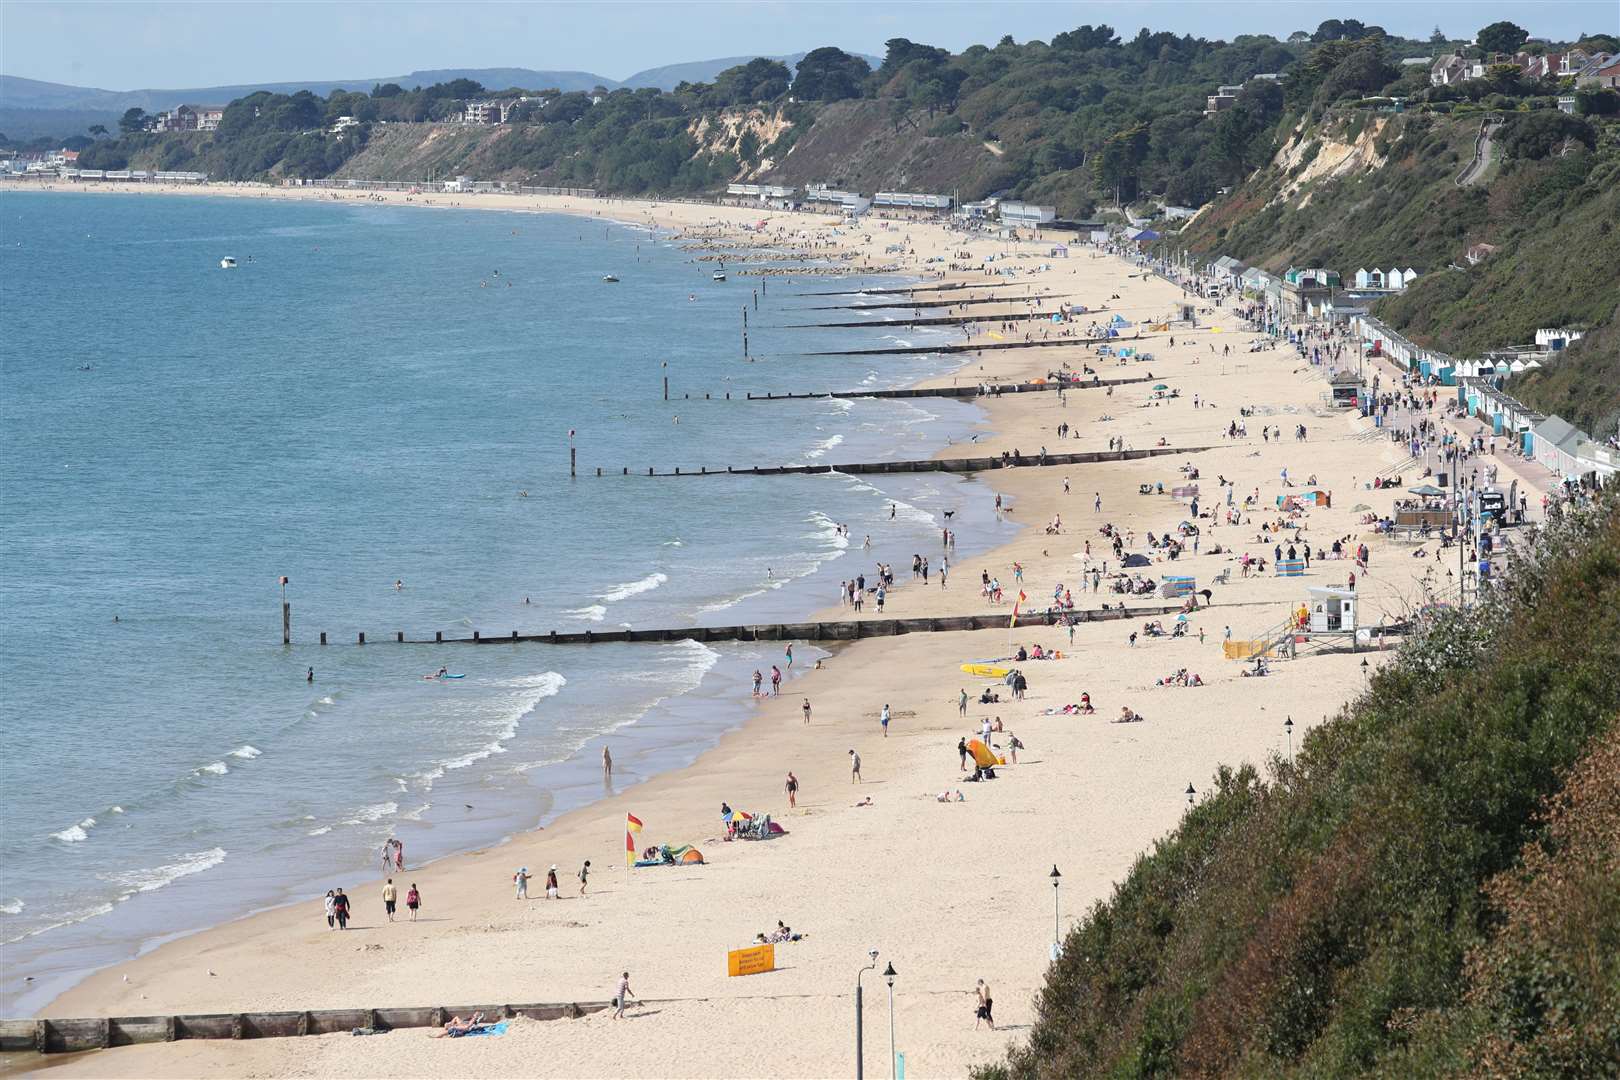 Holidaymakers may be encouraged to spend their summer at UK destinations, such as Bournemouth beach, if international travel is restricted (Jonathan Brady/PA)